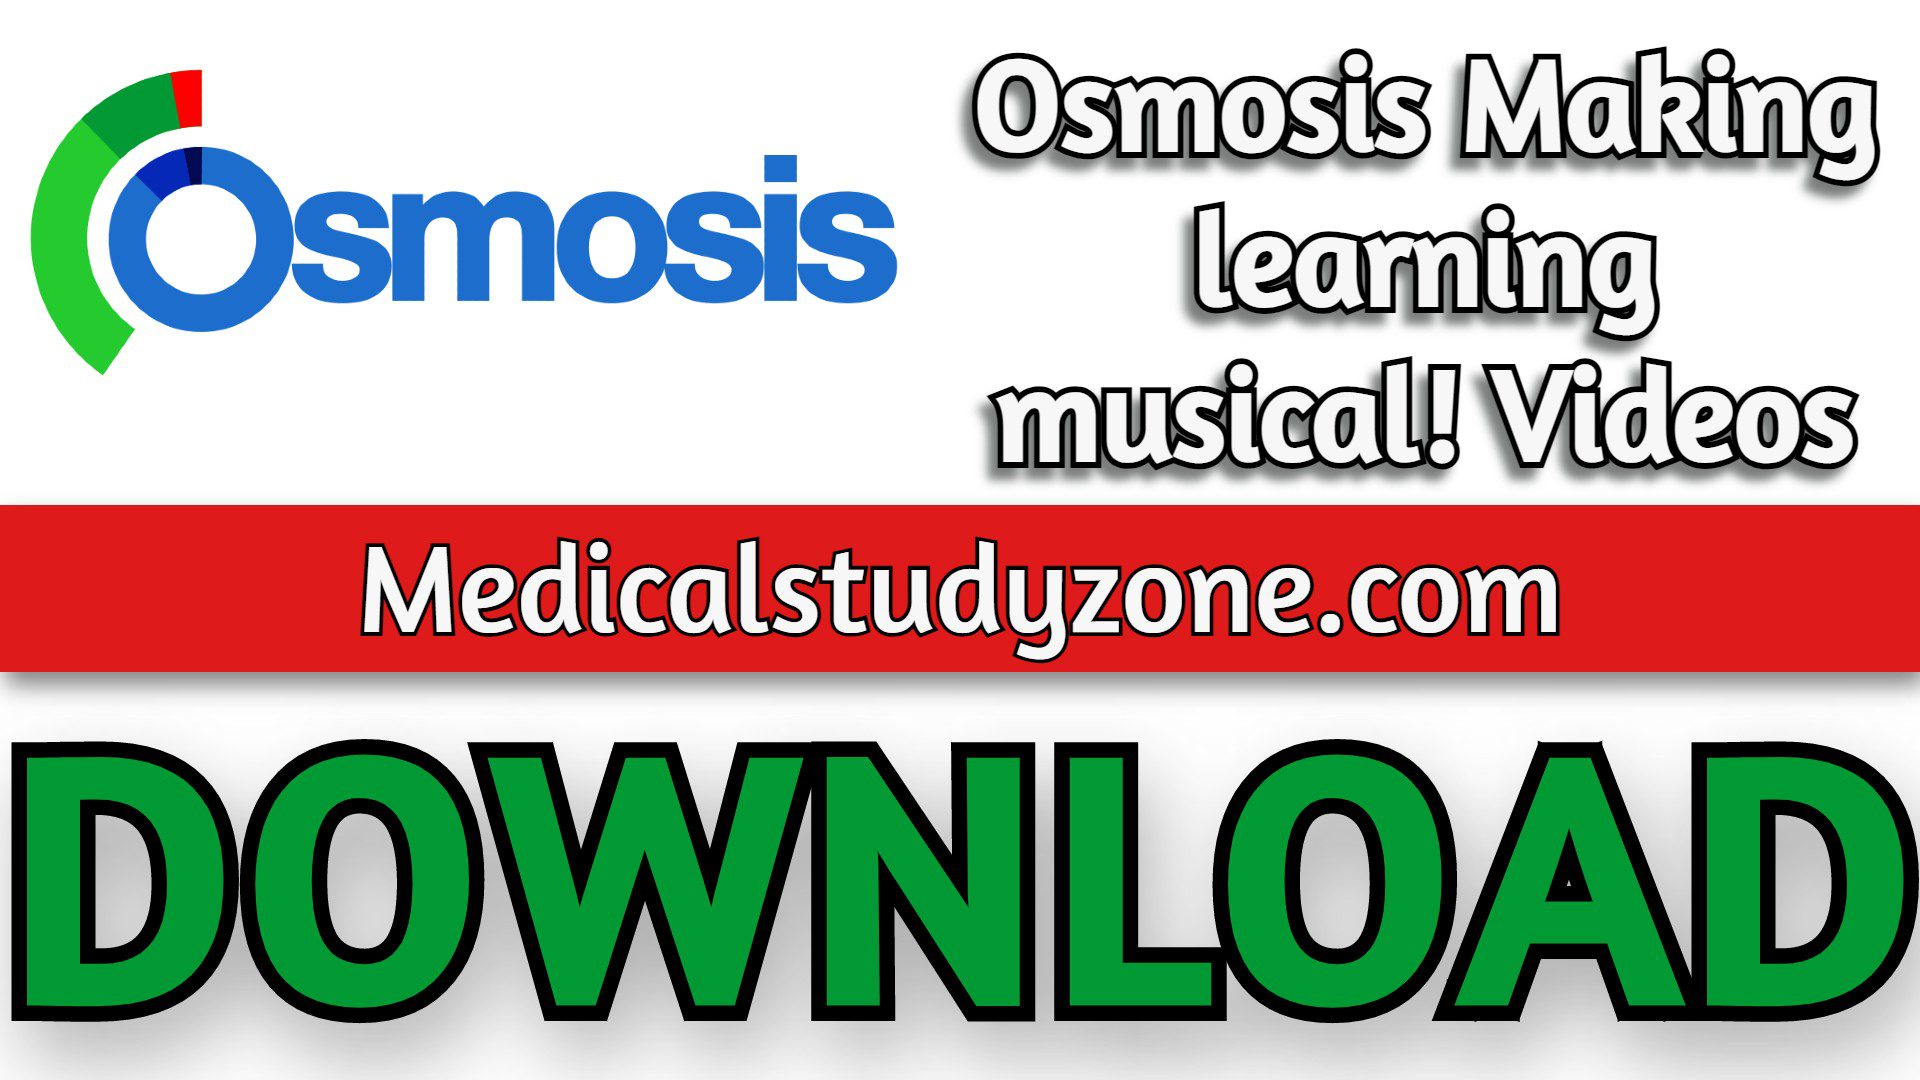 Osmosis Making learning musical! Videos 2022 Free Download